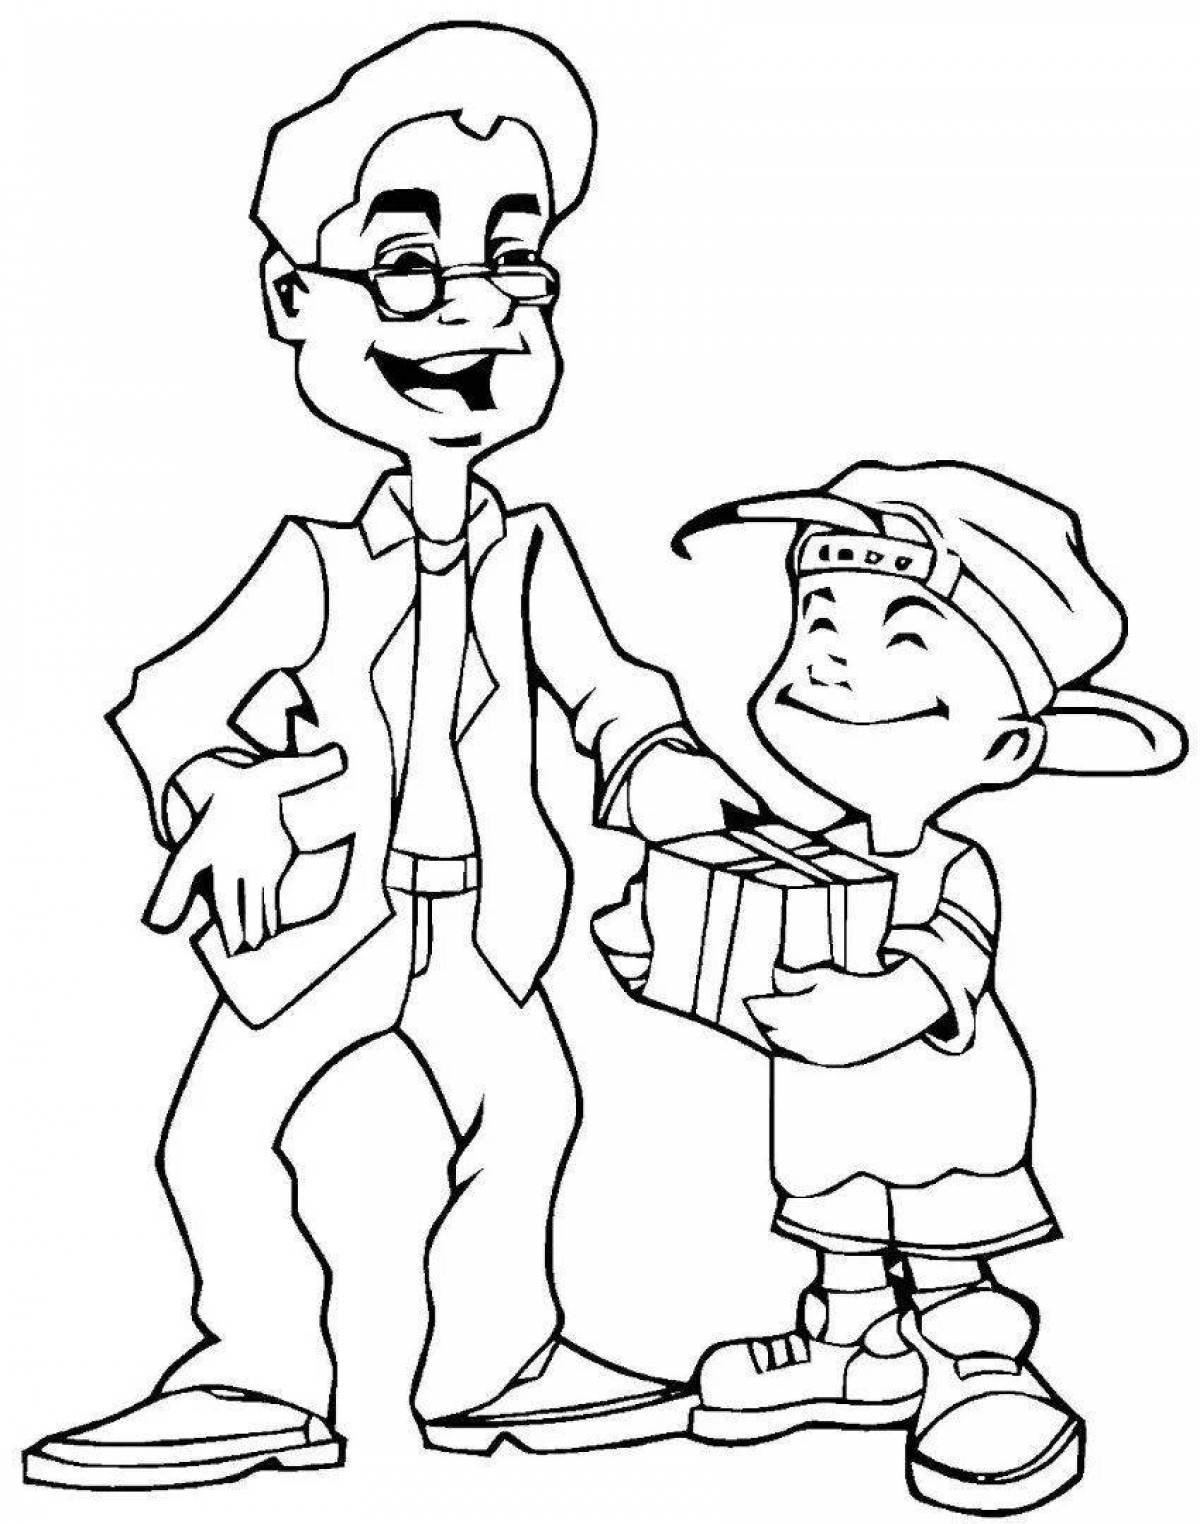 Smiling son and dad coloring book